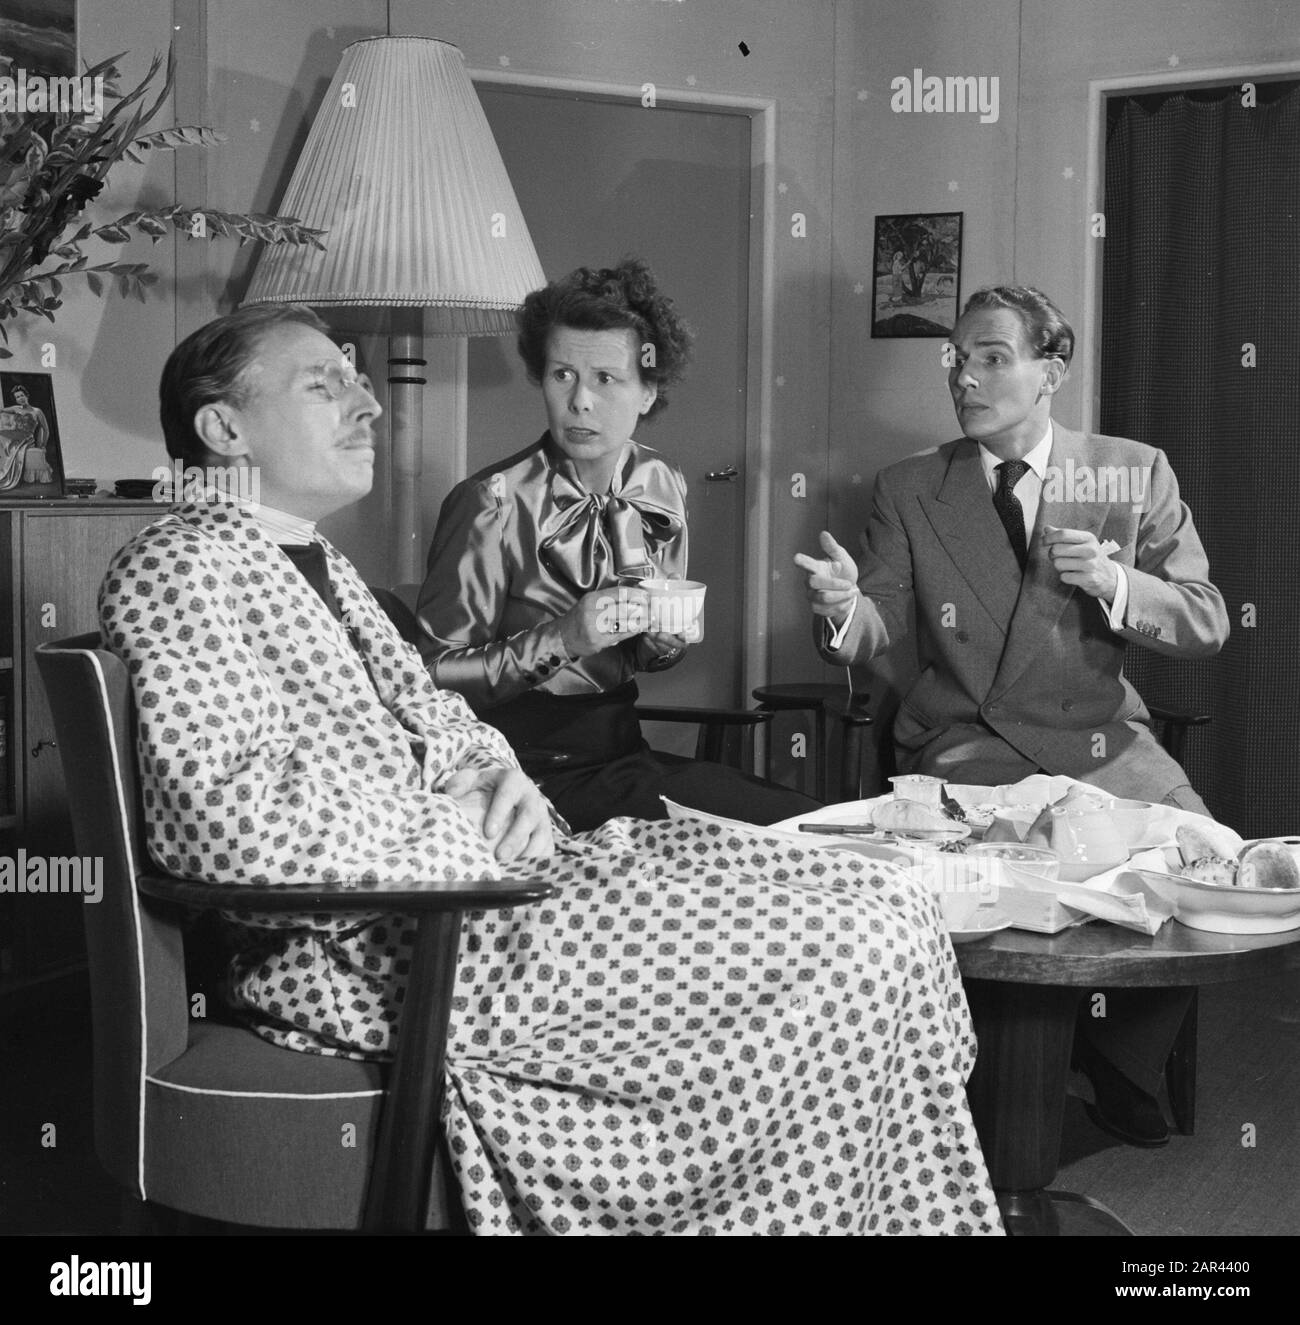 Scene from Nina, by André Roussin, by the Dutch Comedy. Henk Rigters, Mary Dresselhuys, Guus Oster Date: 30 August 1950 Keywords: actors, actresses, stage, actors Personal name: Dresselhuys, Mary, Oster, Guus, Rigters, Henk Institutional name: Dutch Comedy, Rigters, Henk Stock Photo